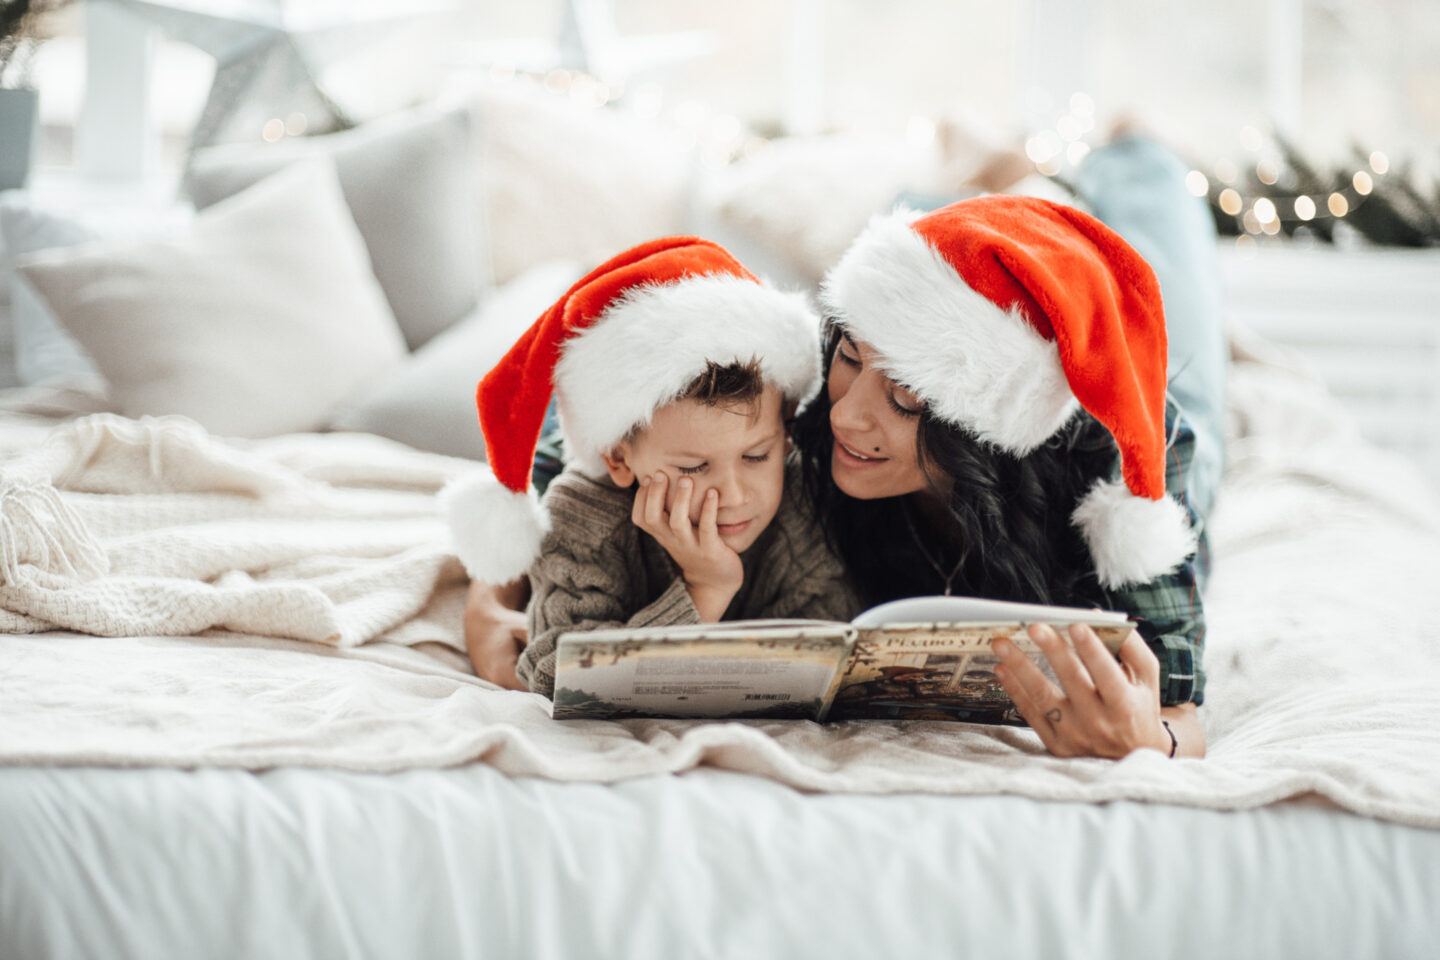 https://www.mother.ly/wp-content/uploads/2021/12/candid-lifestyle-winter-family-portrait-kids-with-mom-in-santa-hats-reading-a-book-spending-time_t20_lLZE9m-1440x960.jpg